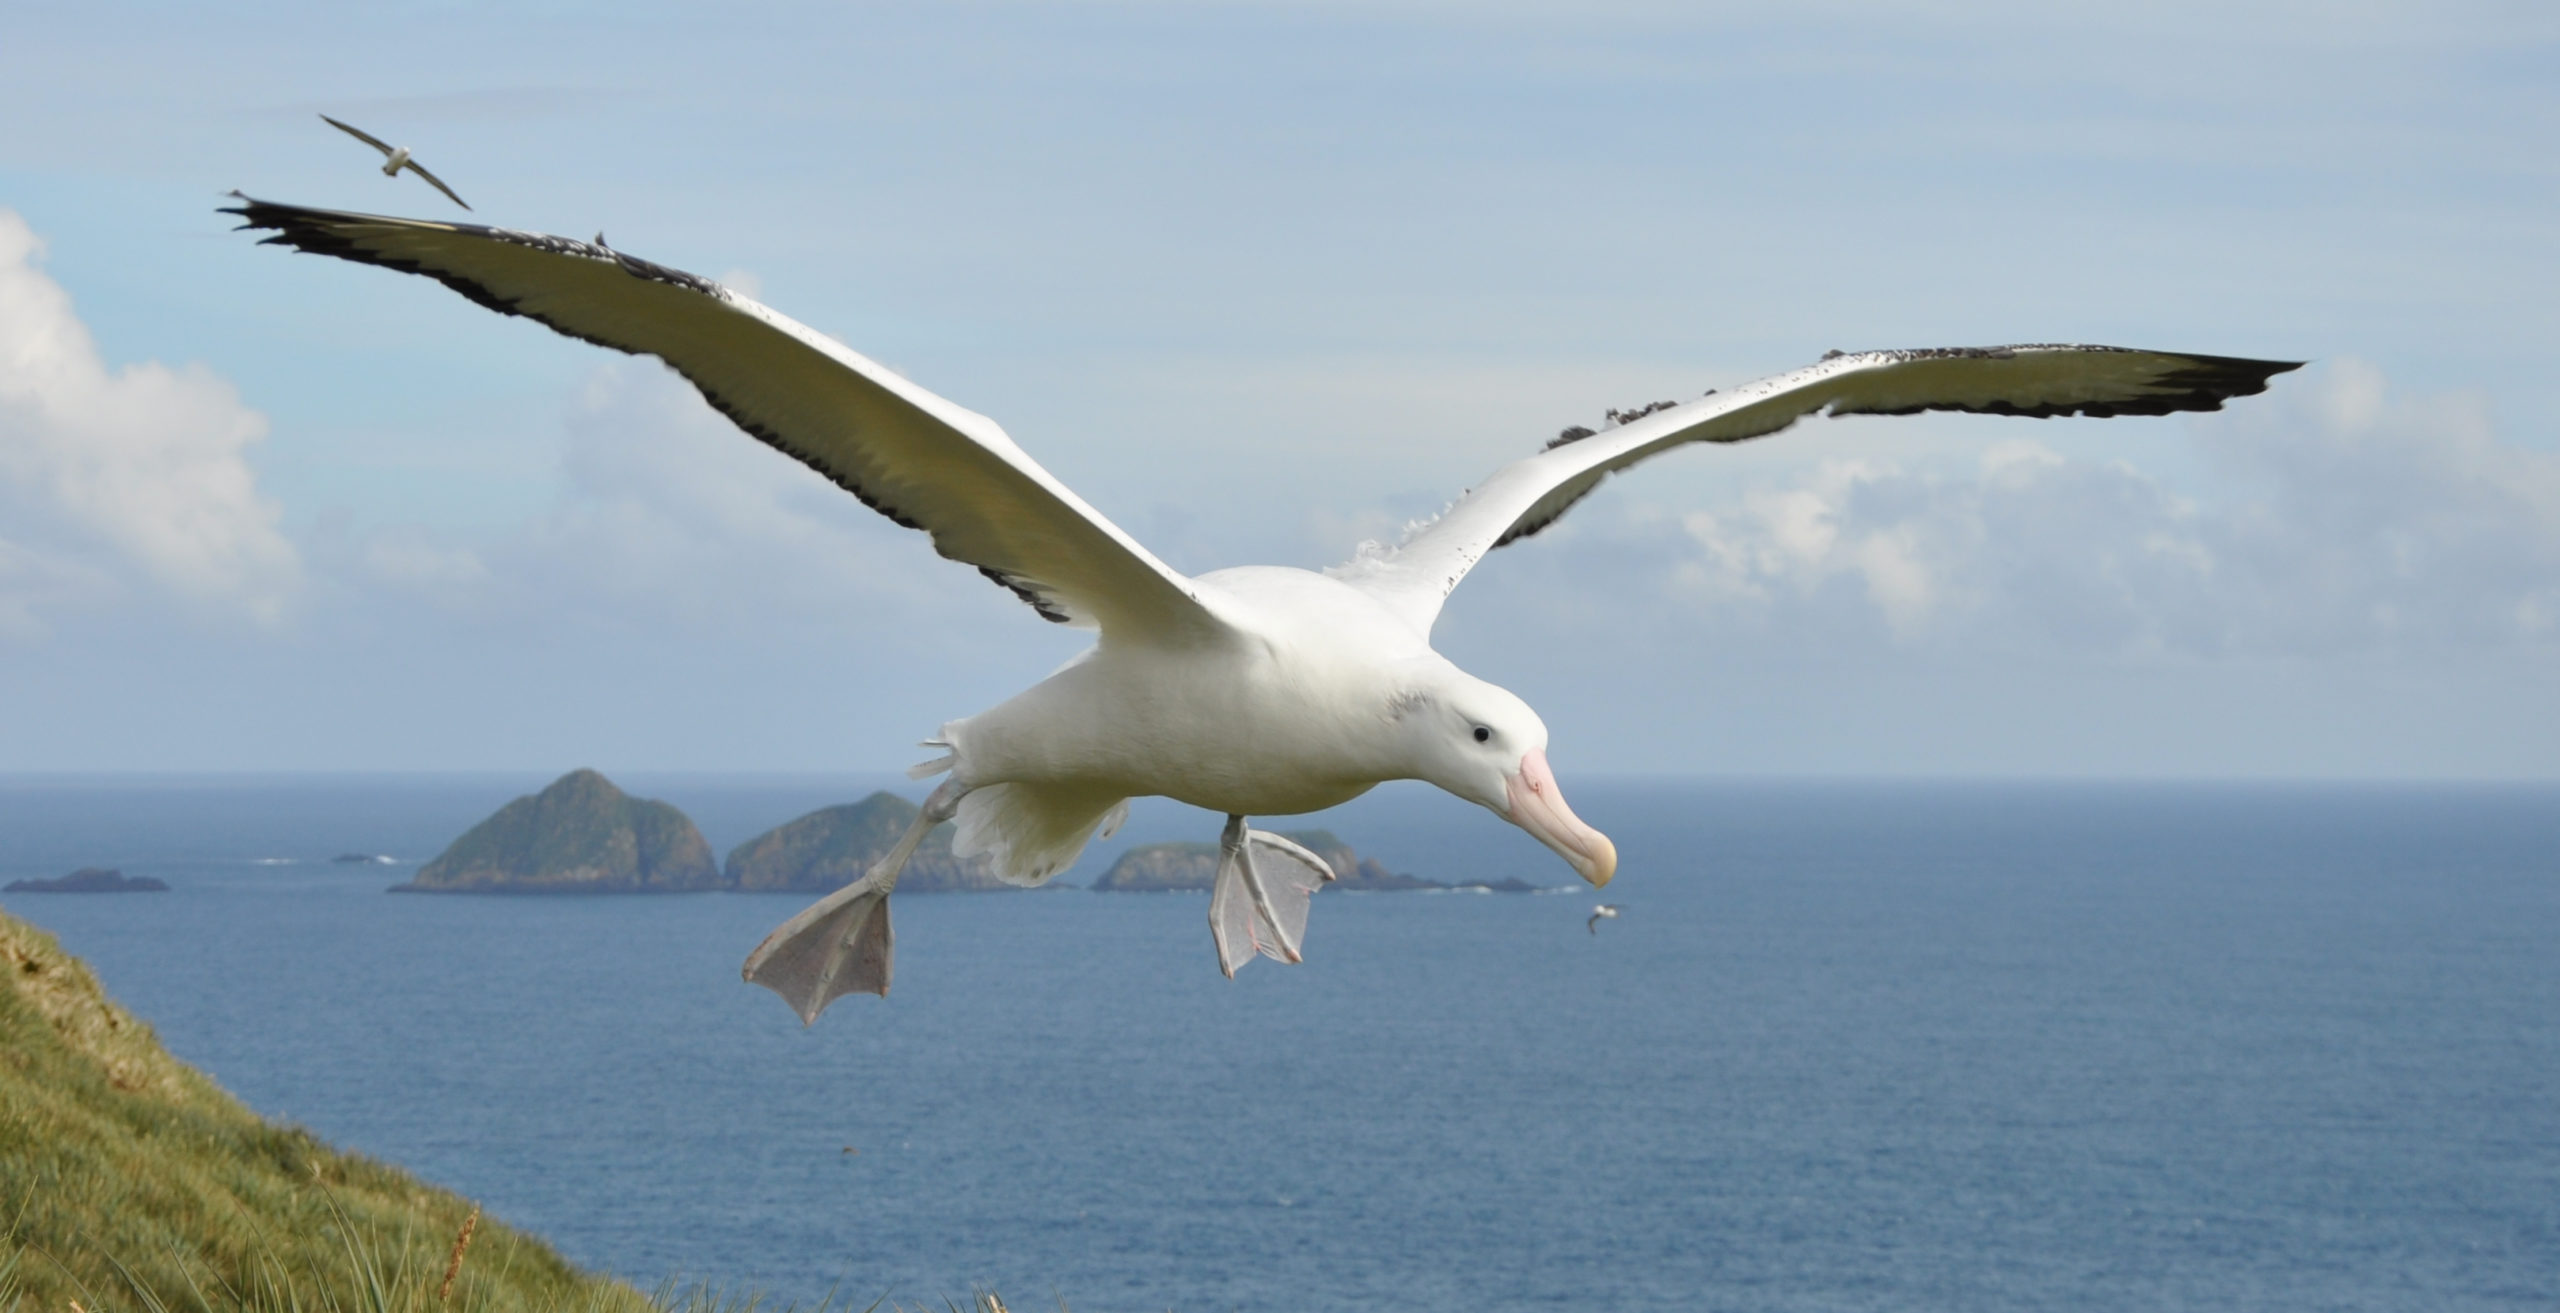 What is the Biggest Bird in the World That Can Fly? The wandering albatross is the largest bird with the largest wingspan